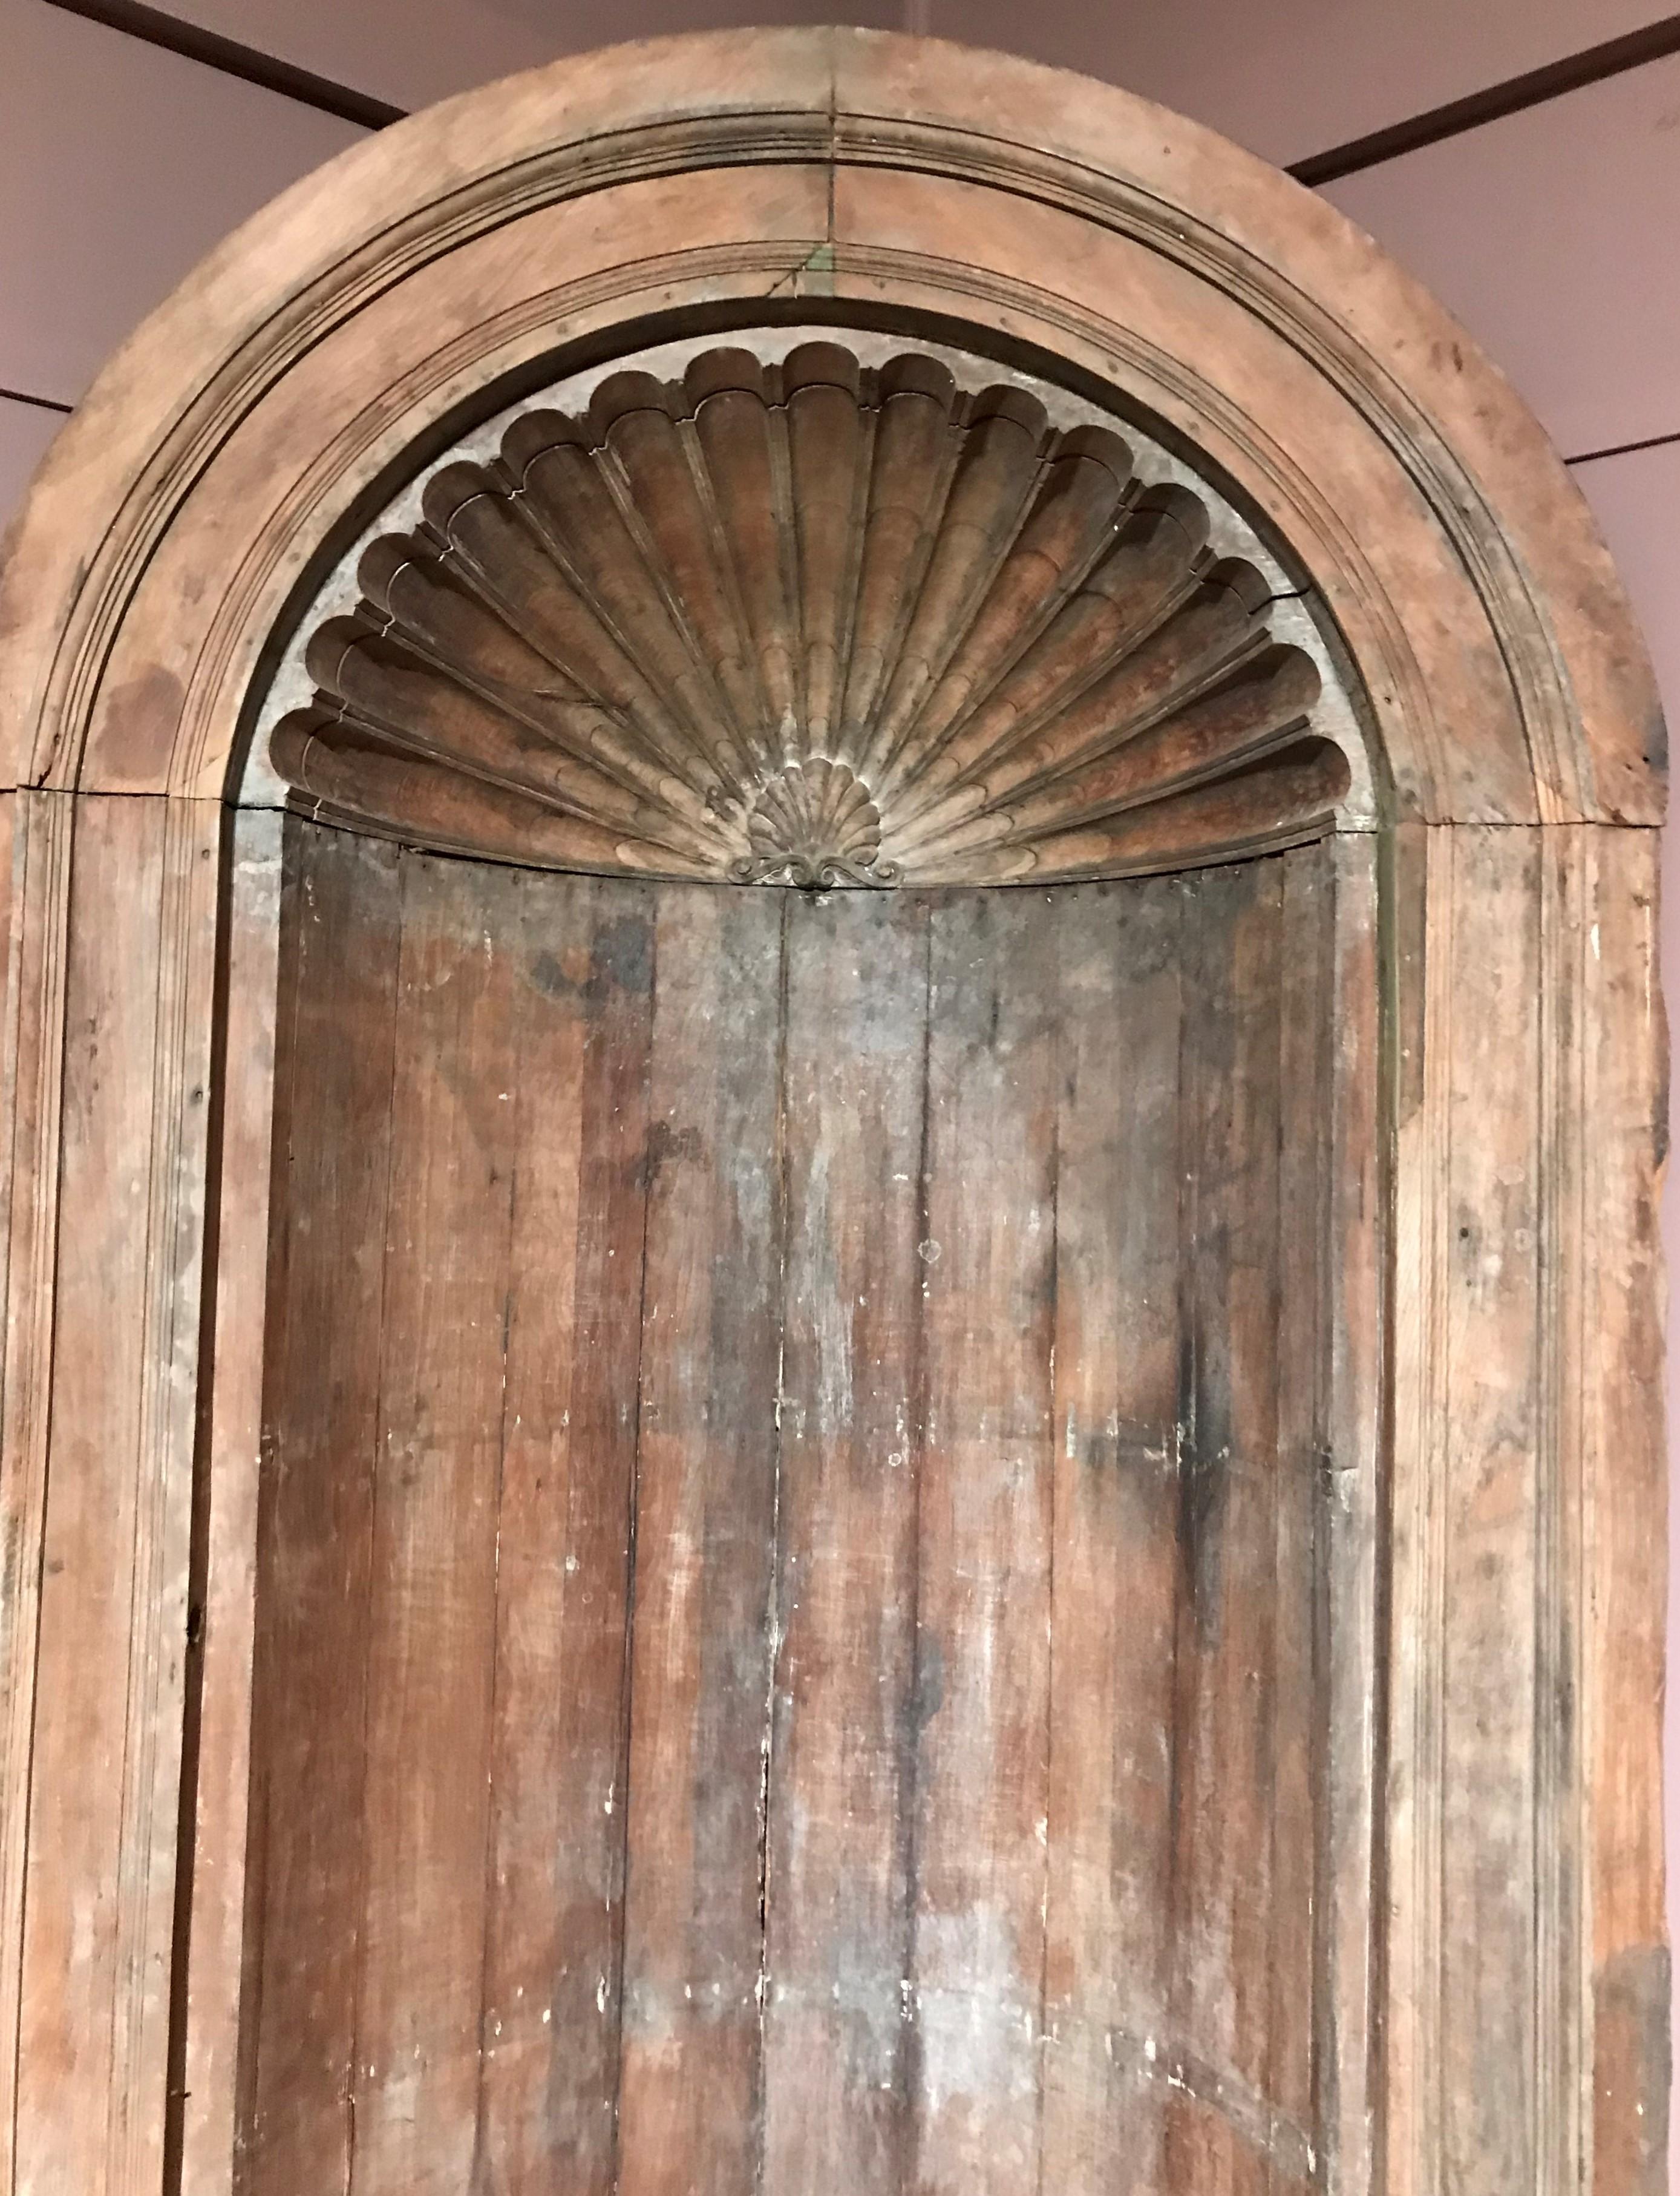 A fine one-piece built-in architectural corner cupboard with arched top and back , featuring scalloped shell decoration and a continuous molded surround, with a single shaped shelf and paneled base. Dates to the 18th century in very good condition